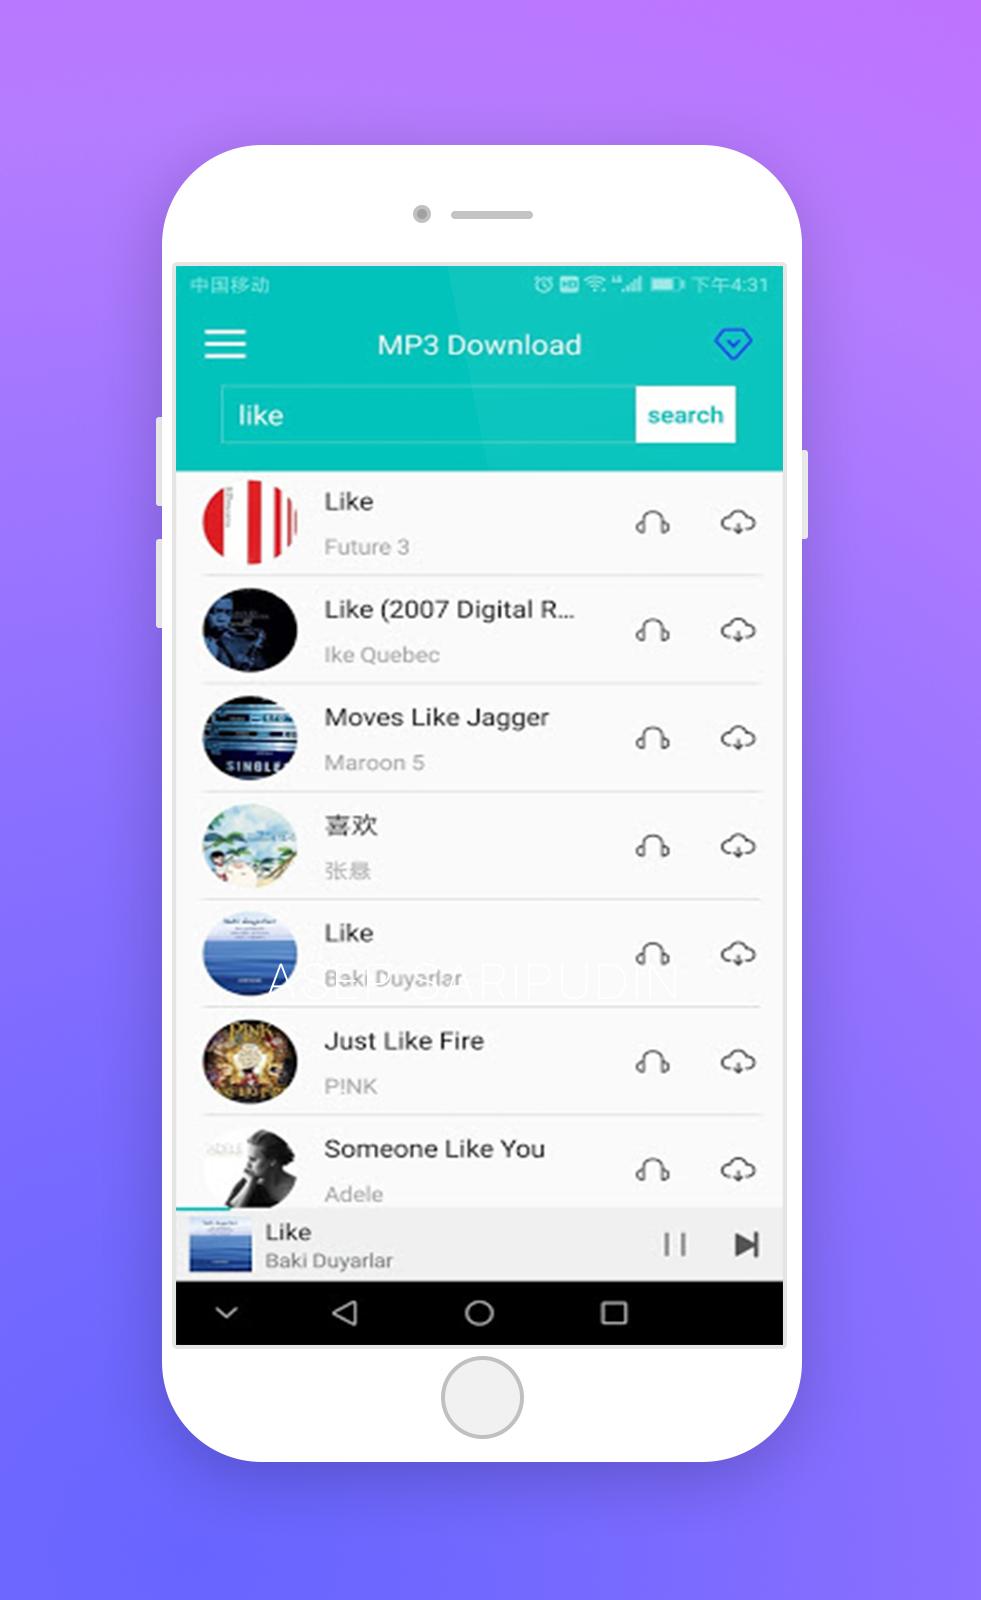 mp3 juice for Android - APK Download